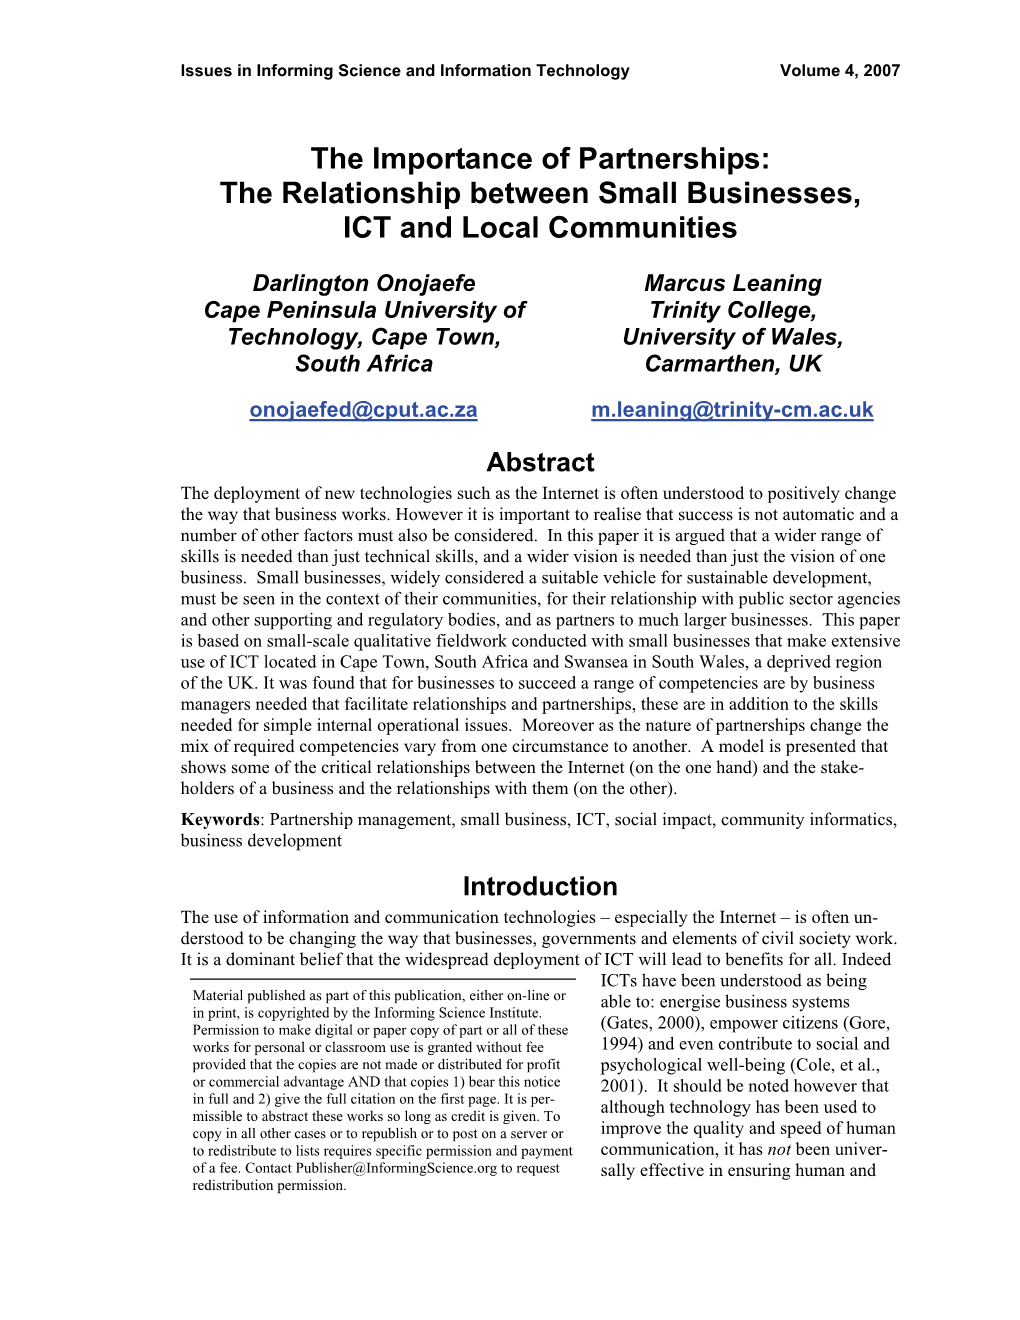 The Importance of Partnerships: the Relationship Between Small Businesses, ICT and Local Communities